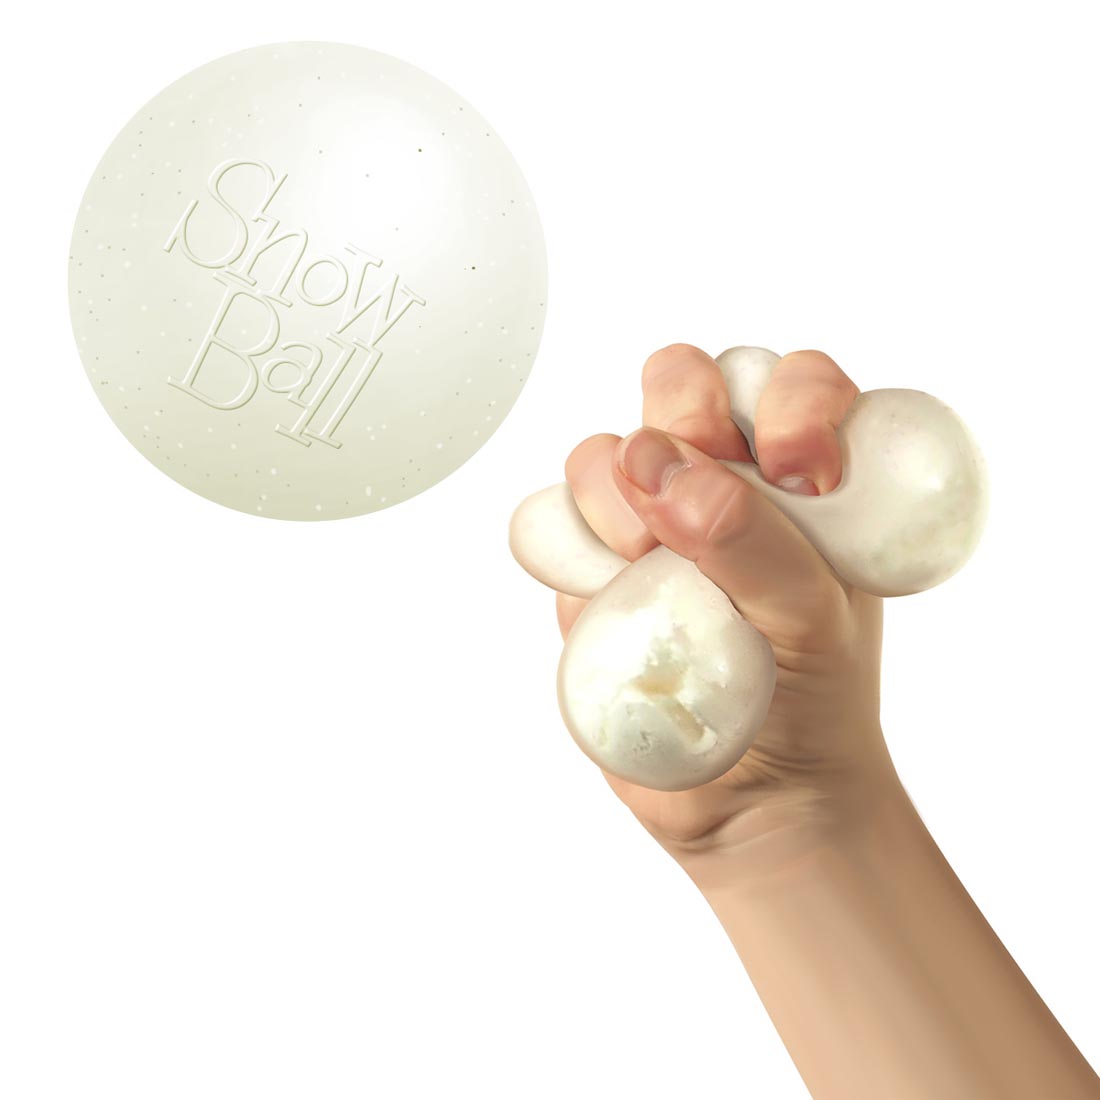 Snowball Crunchy Stress Ball next to a hand squeezing one